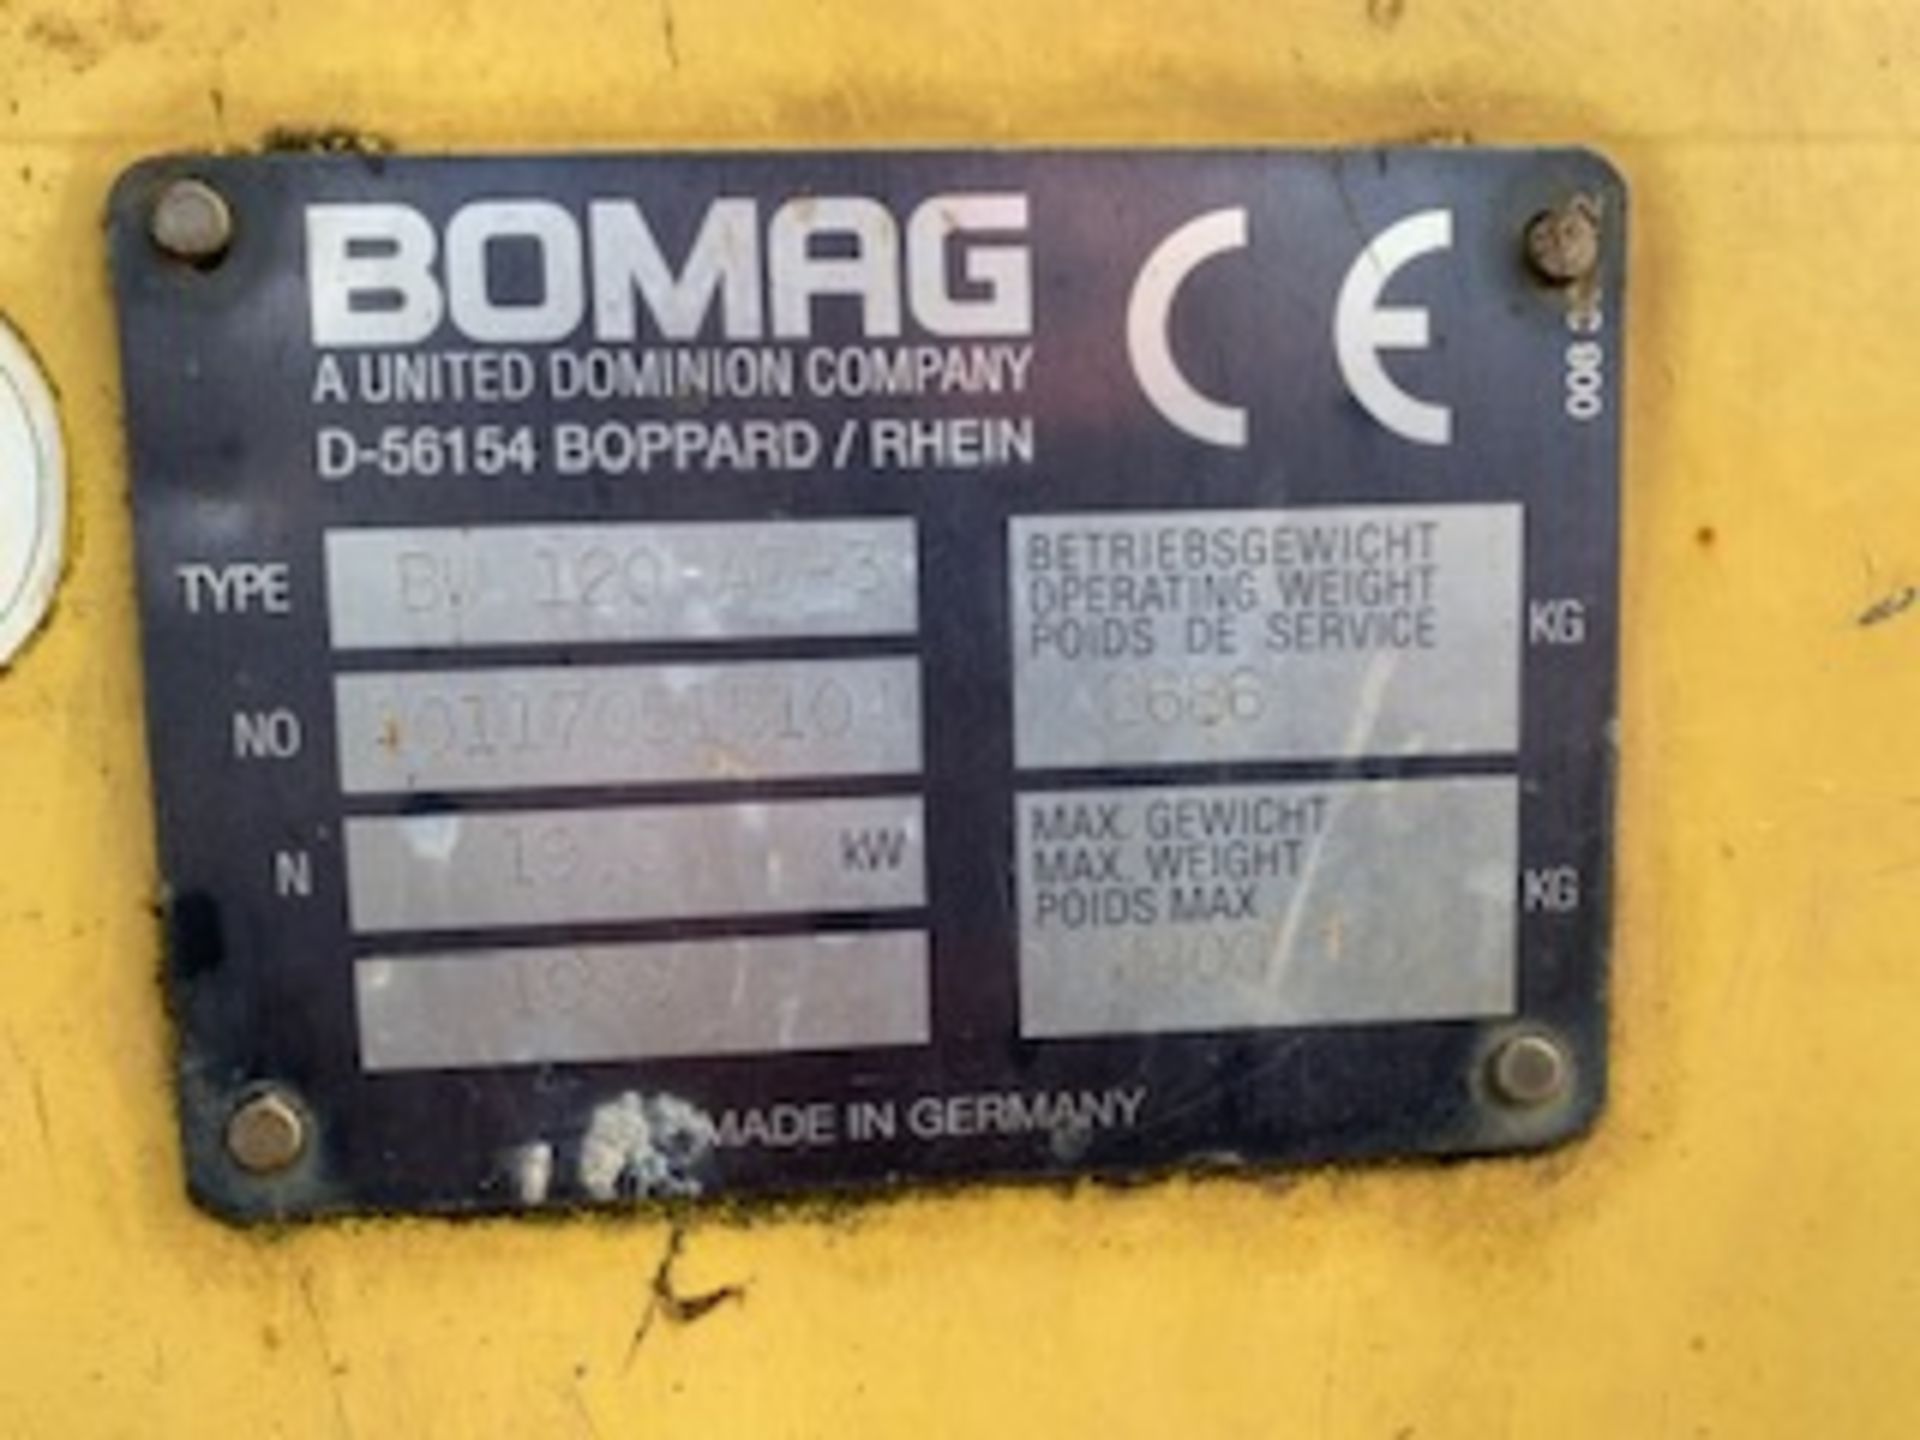 BOMAG BW120 AD-3 ROLLER YEAR 1999 -- 2394HRS (NOT VERIFIED) SN - 101170515104 - Image 8 of 8